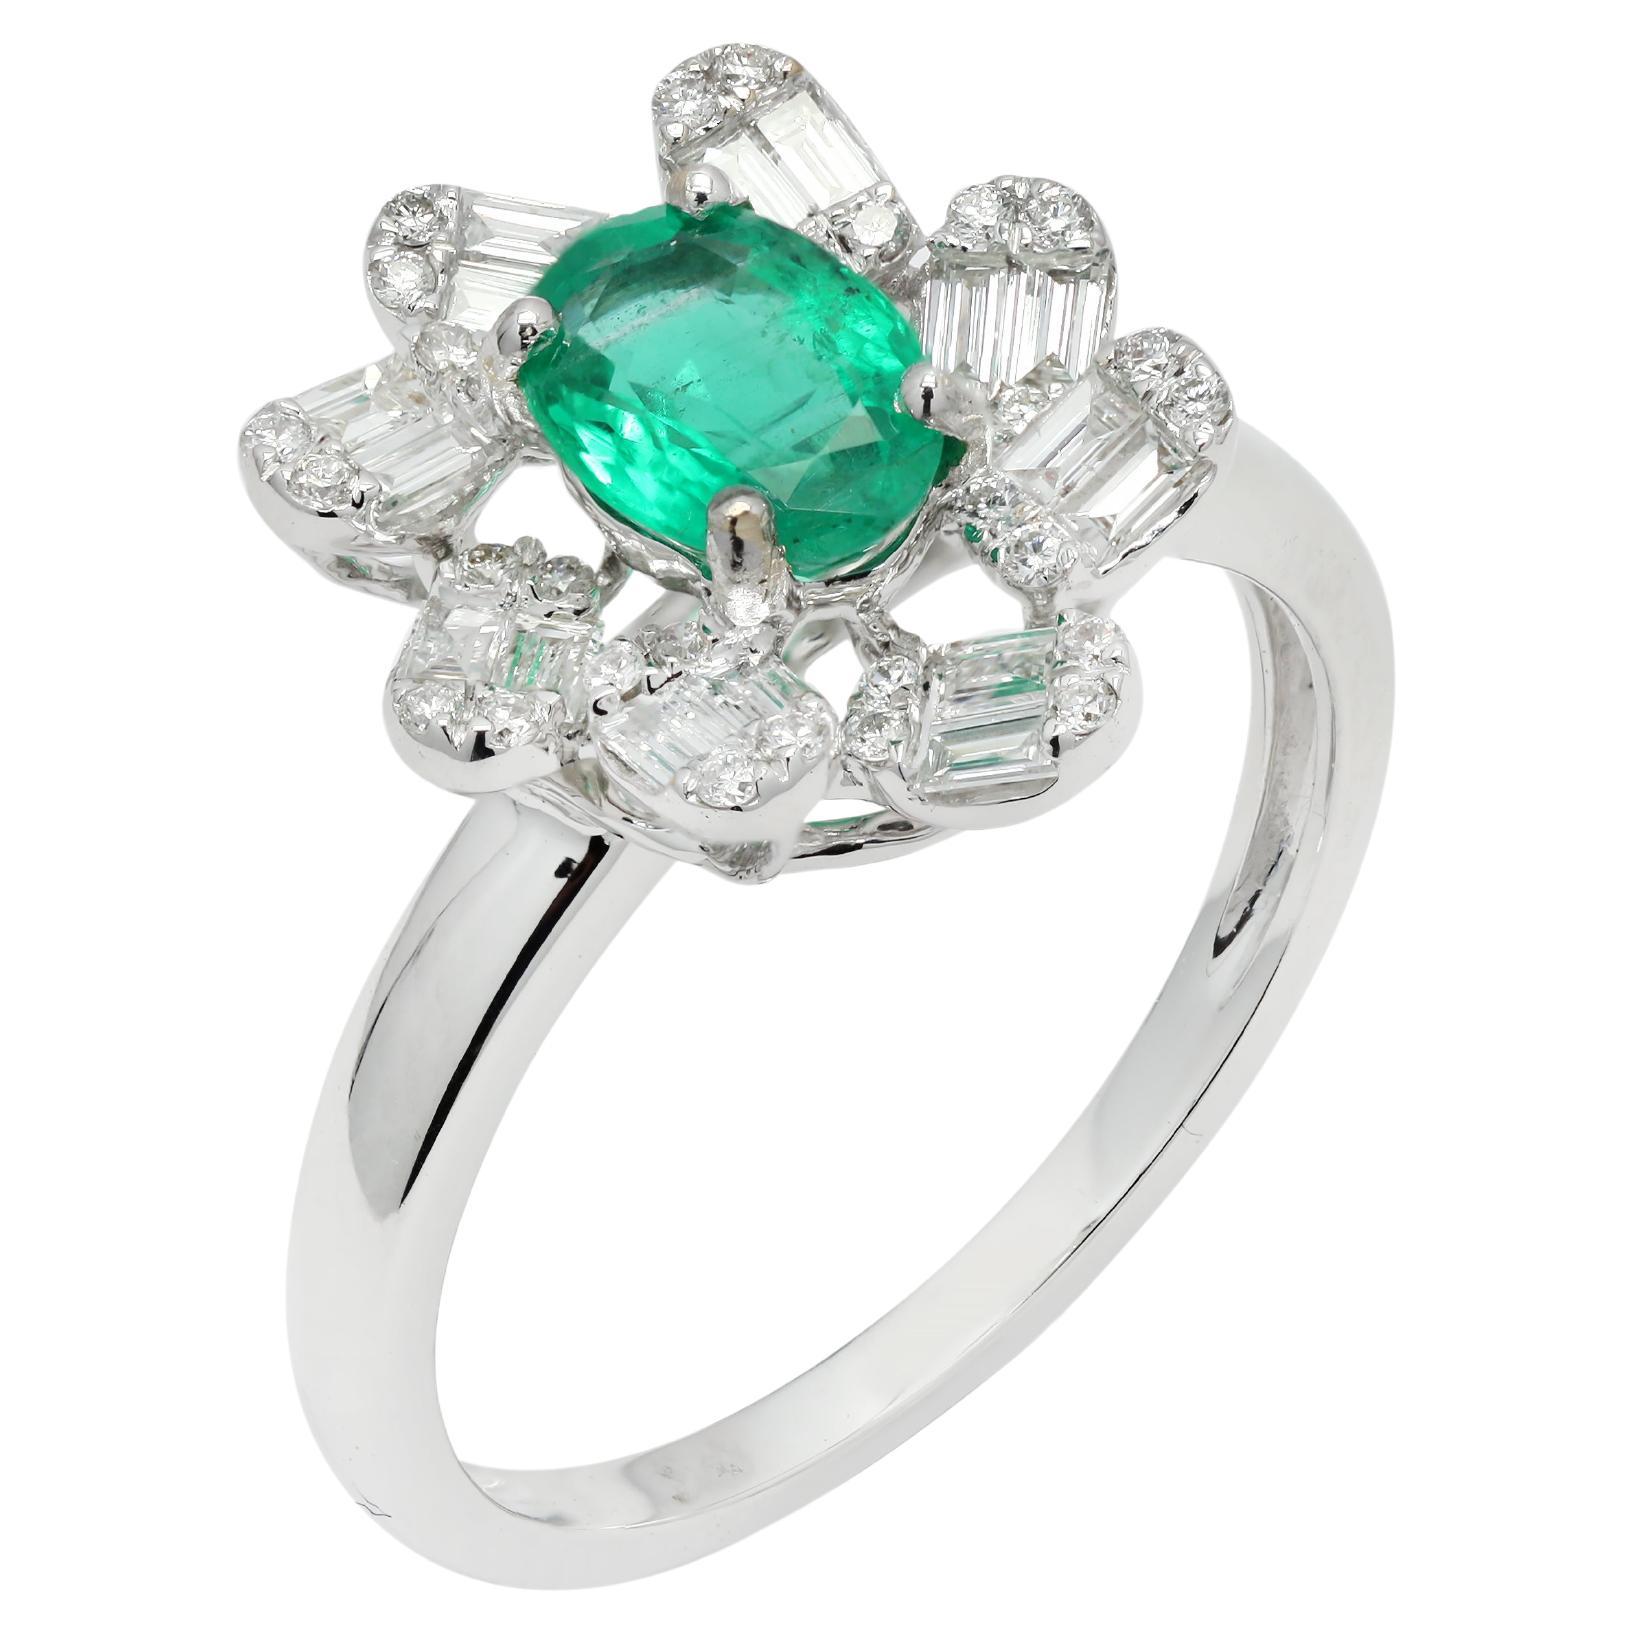 For Sale:  Designer Oval Cut Emerald and Diamond Engagement Ring in 18K Solid White Gold 2